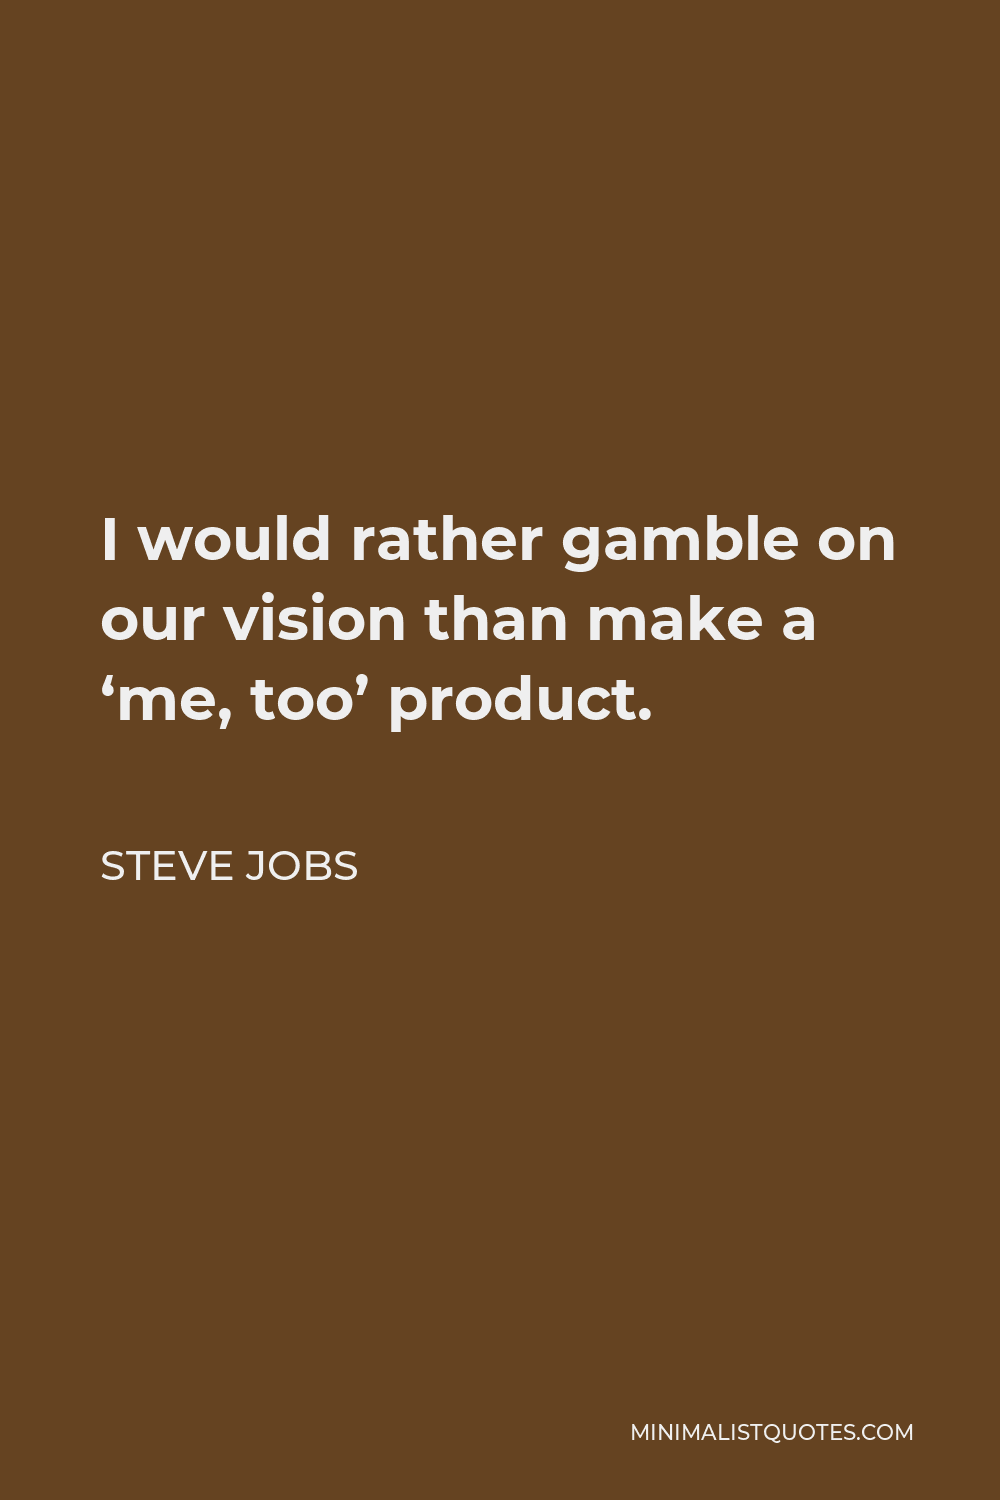 Steve Jobs Quote - I would rather gamble on our vision than make a ‘me, too’ product.